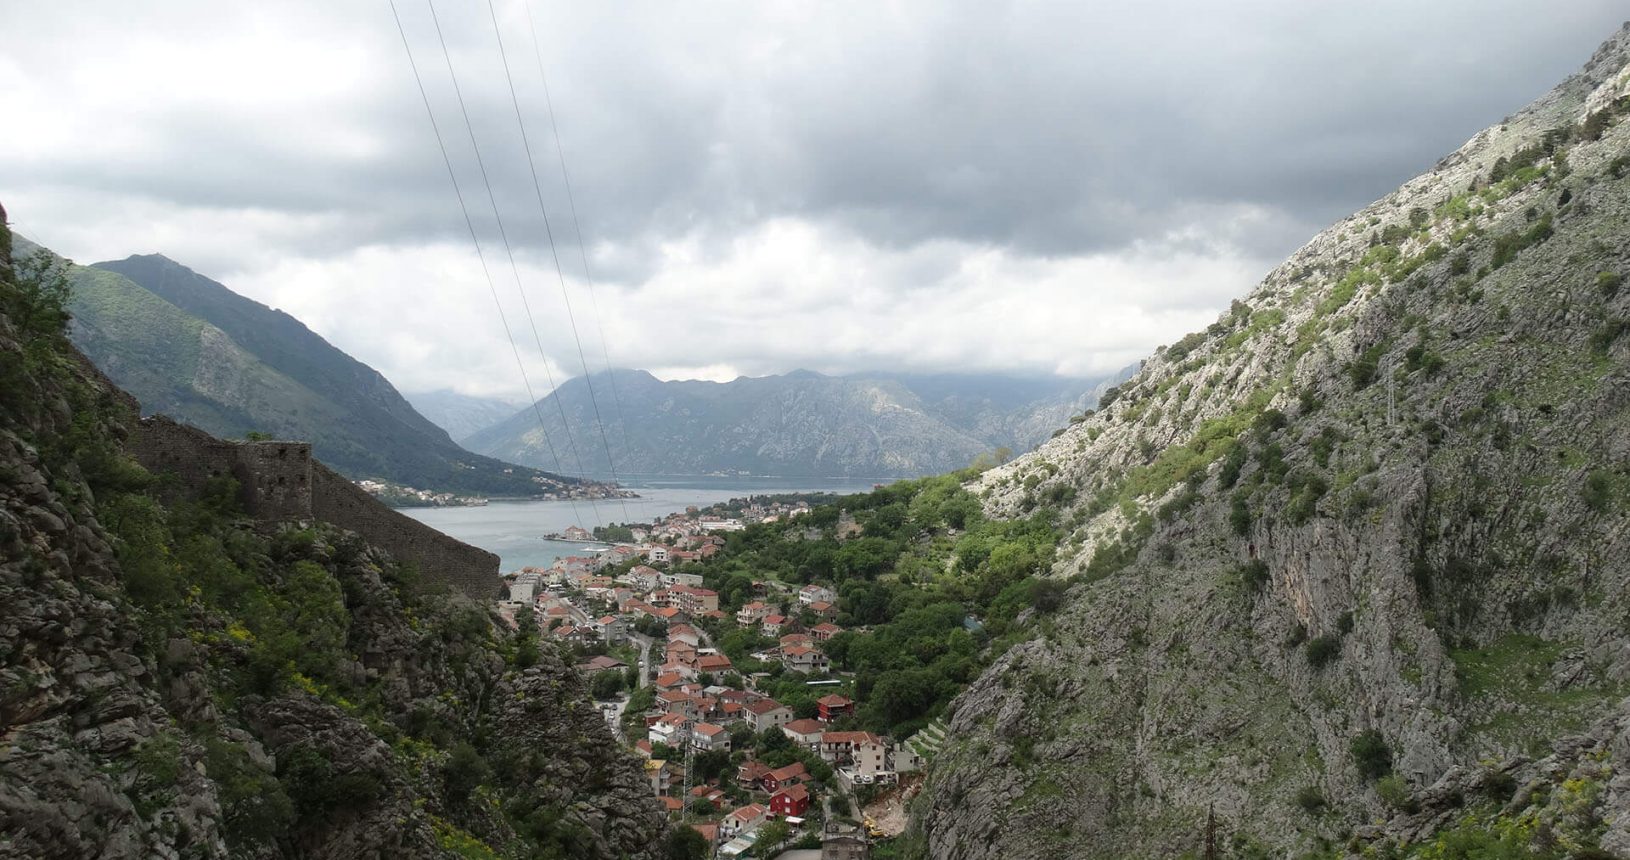 The view on the way to Kotor Fortress